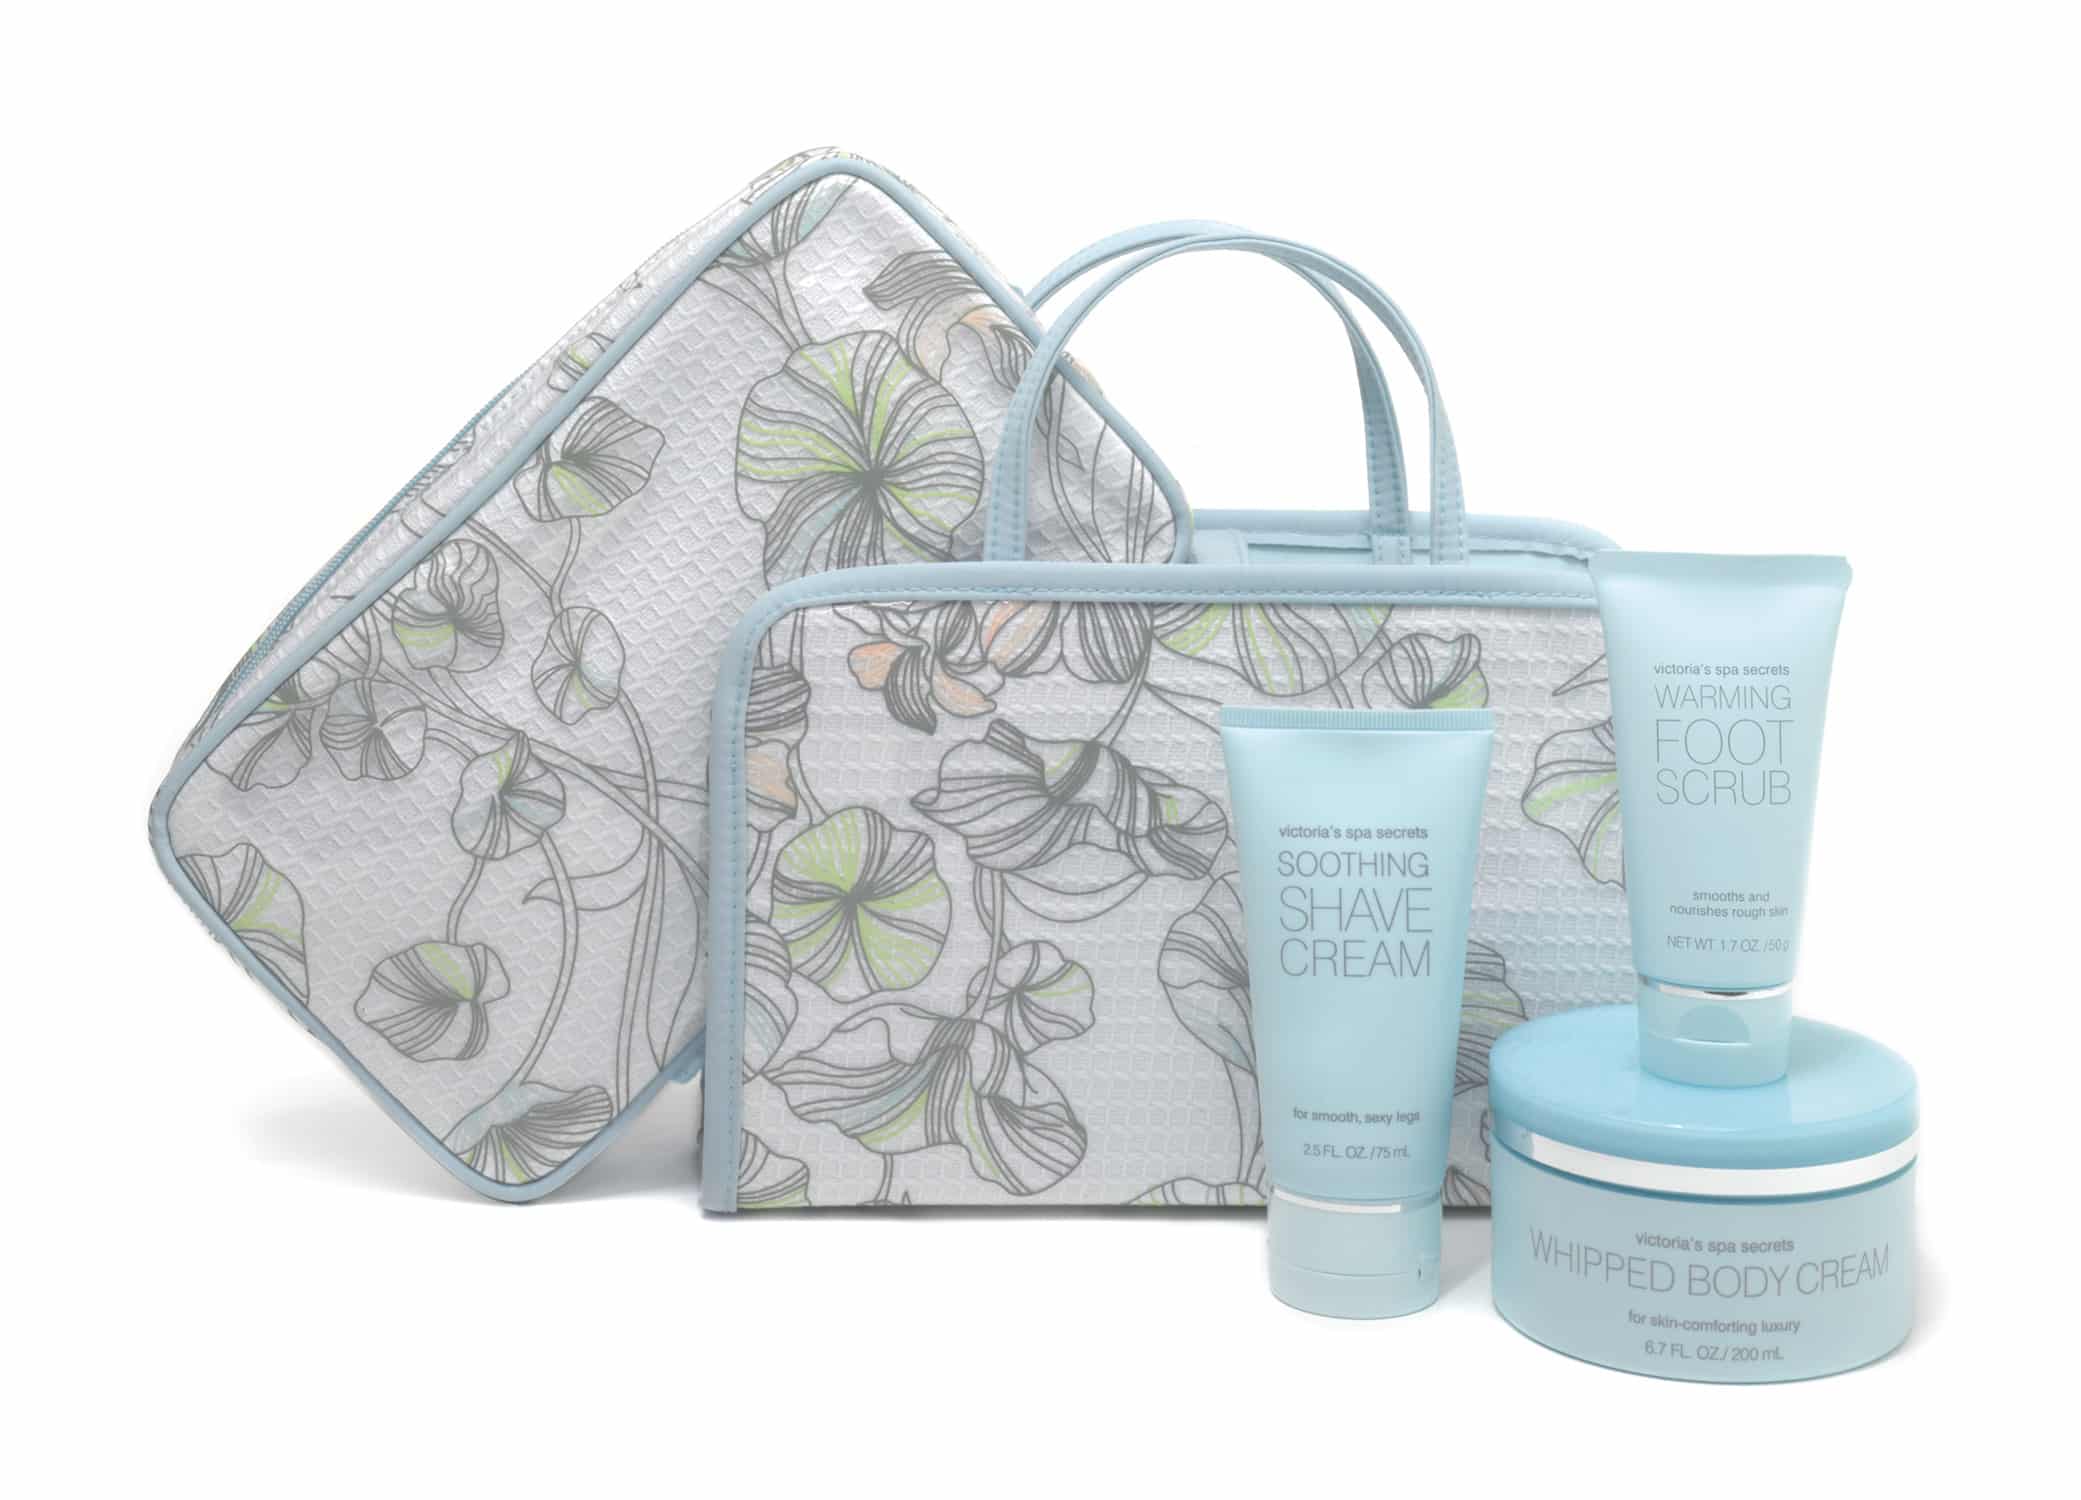 Victoria's Secret Spa Secrets travel set packaging design showcasing light blue lotions and pouches with floral designs.